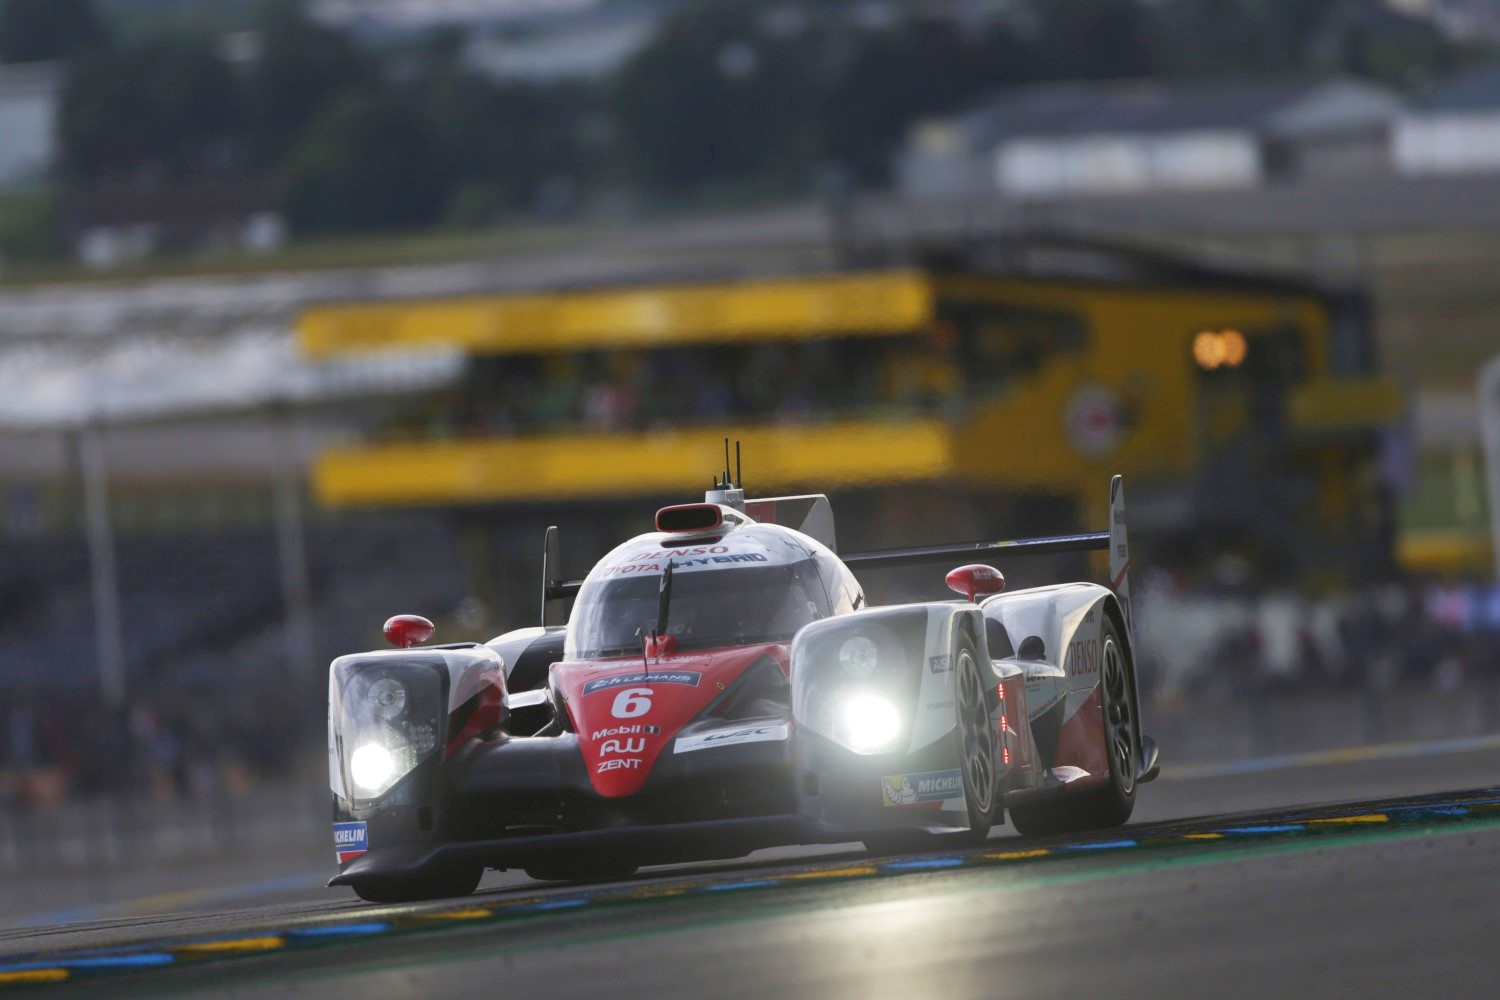 The #6 Toyota leads at night in LeMans